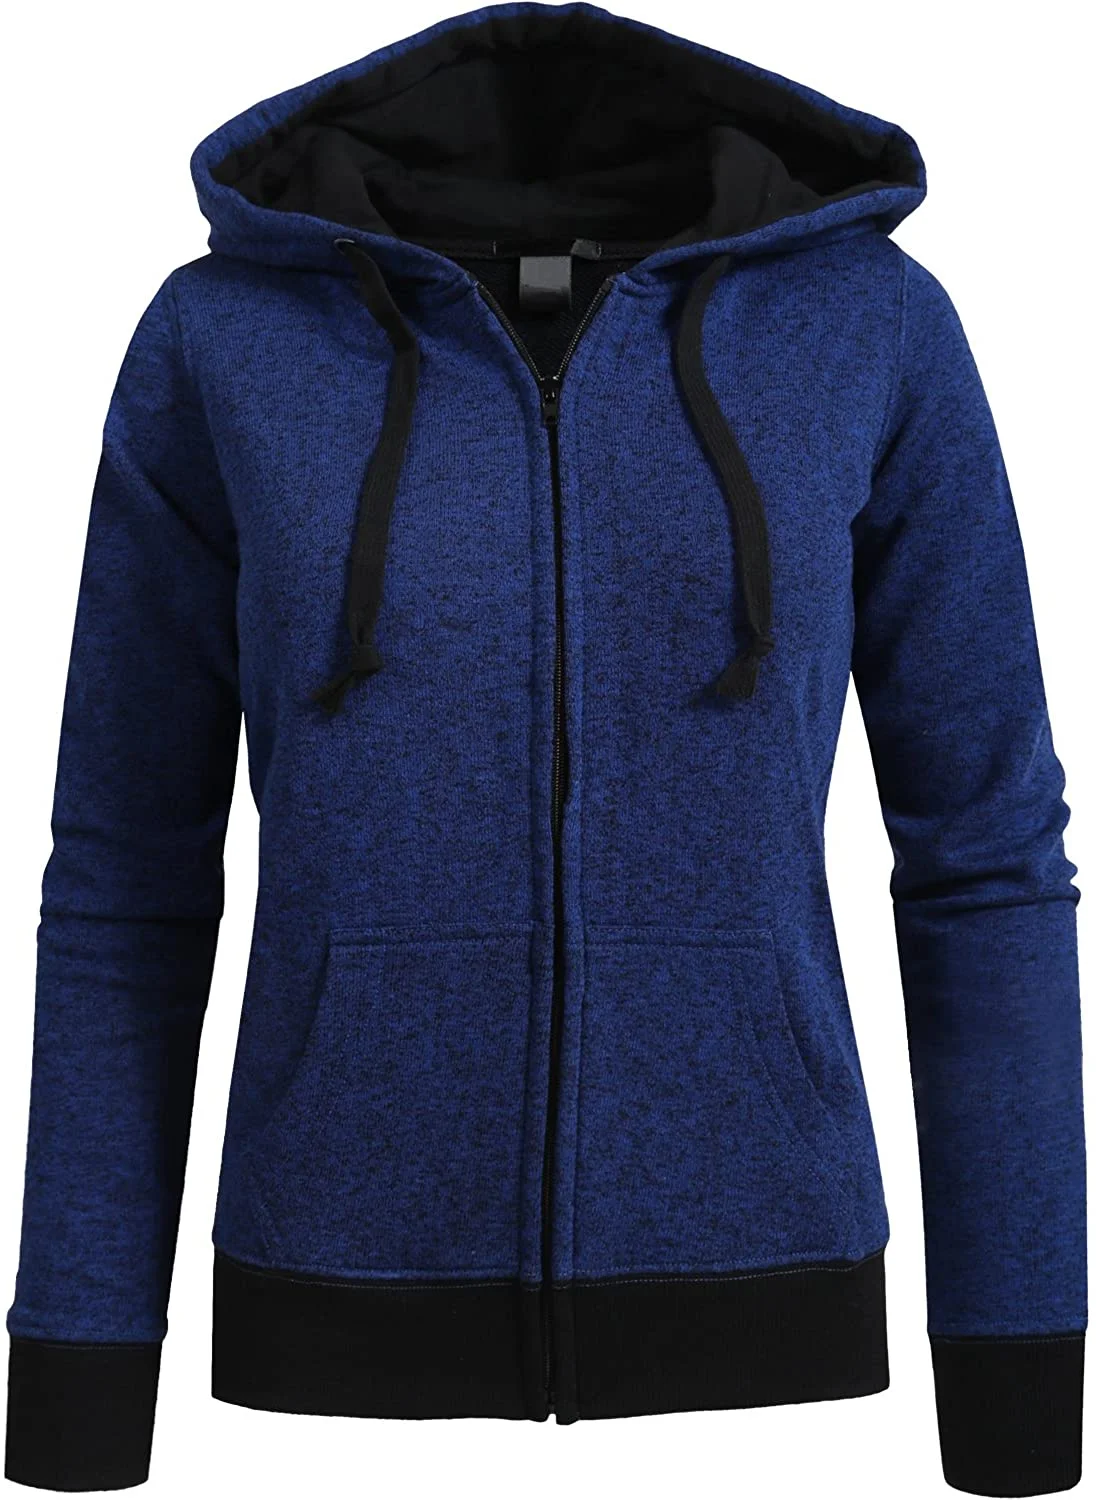 Hoodies - Bangladesh Factory, Suppliers, Manufacturers